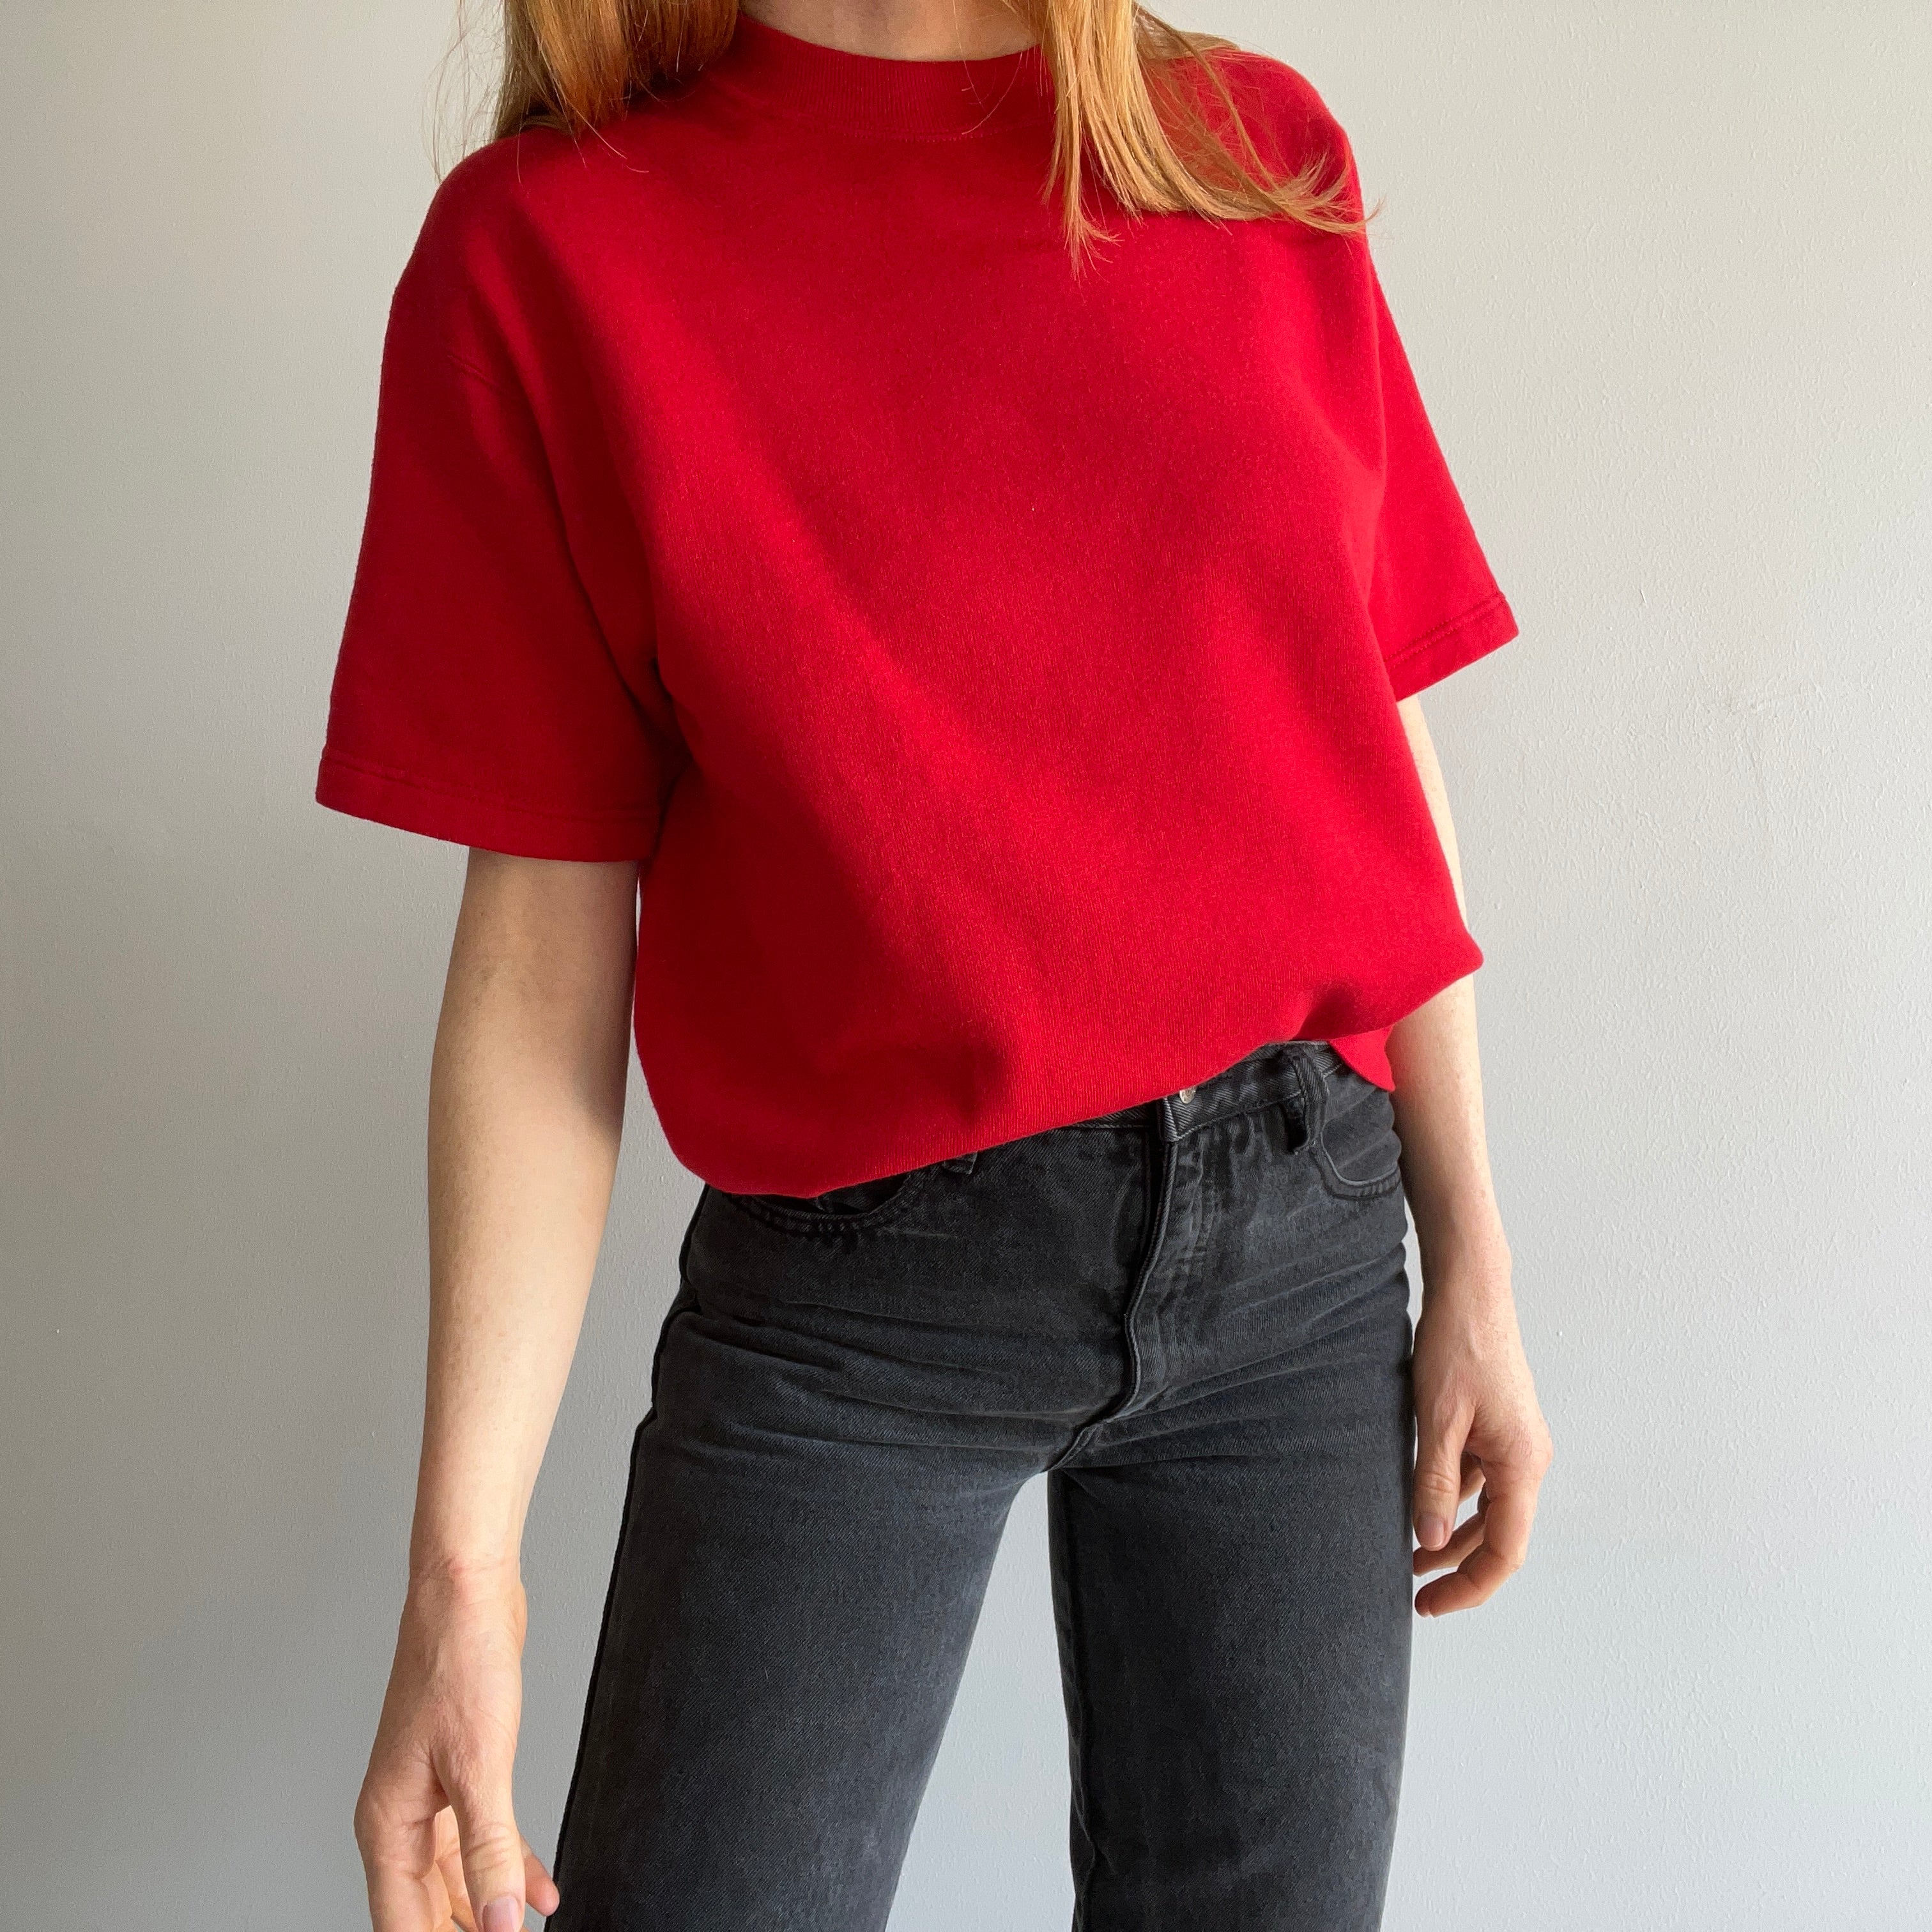 1980/90s Blank Red Warm Up T-Shirt Sweatshirt by Jerzees